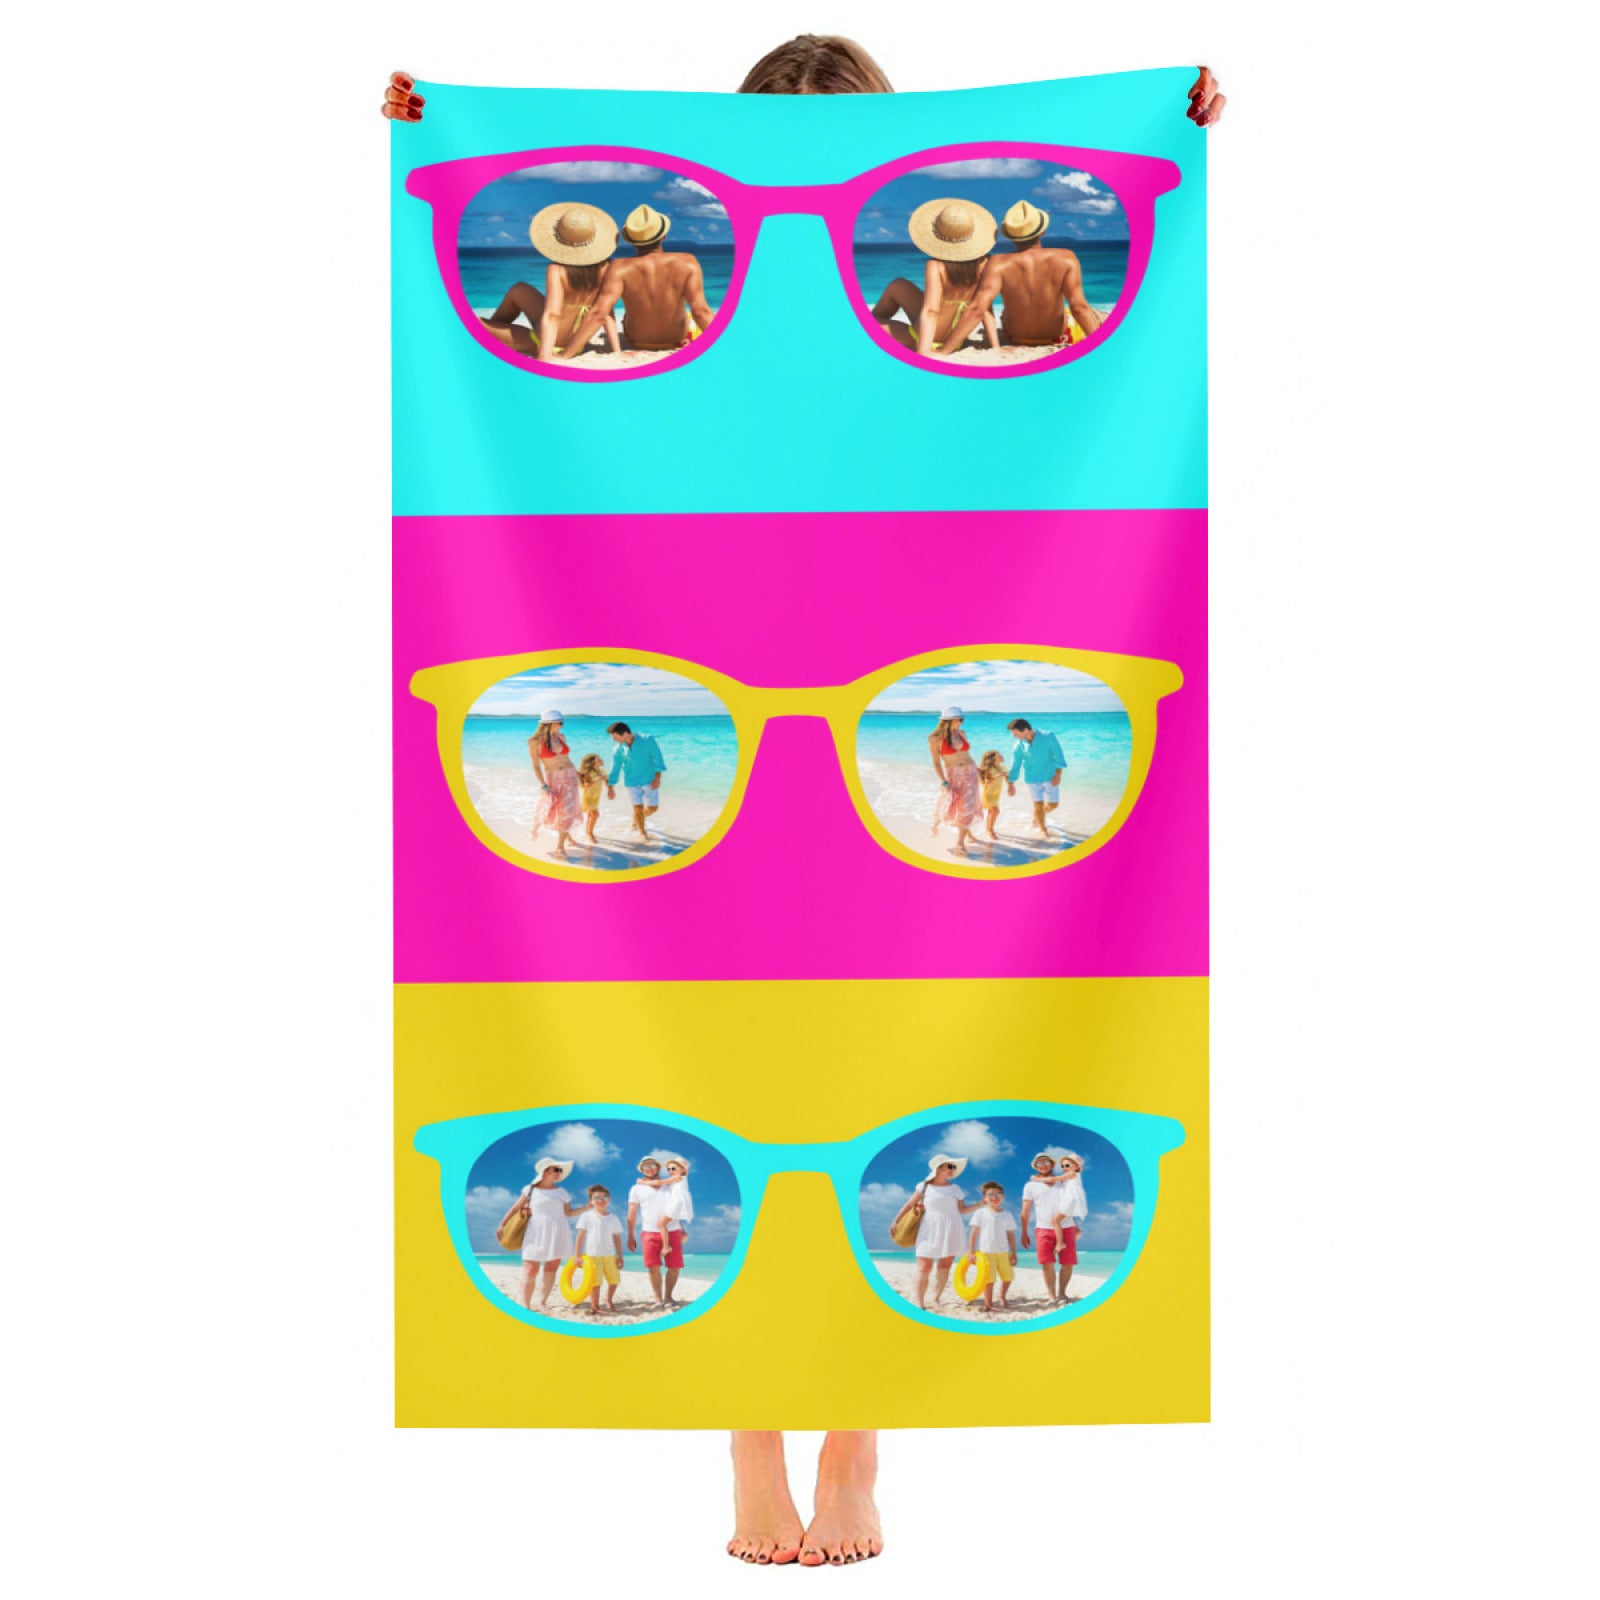 Personalized Beach Towel, Upload Pictures To Customize Exclusive Beach Towels, The Best Choice For Parents, Children, Friends And Gifts - colorfulcustom